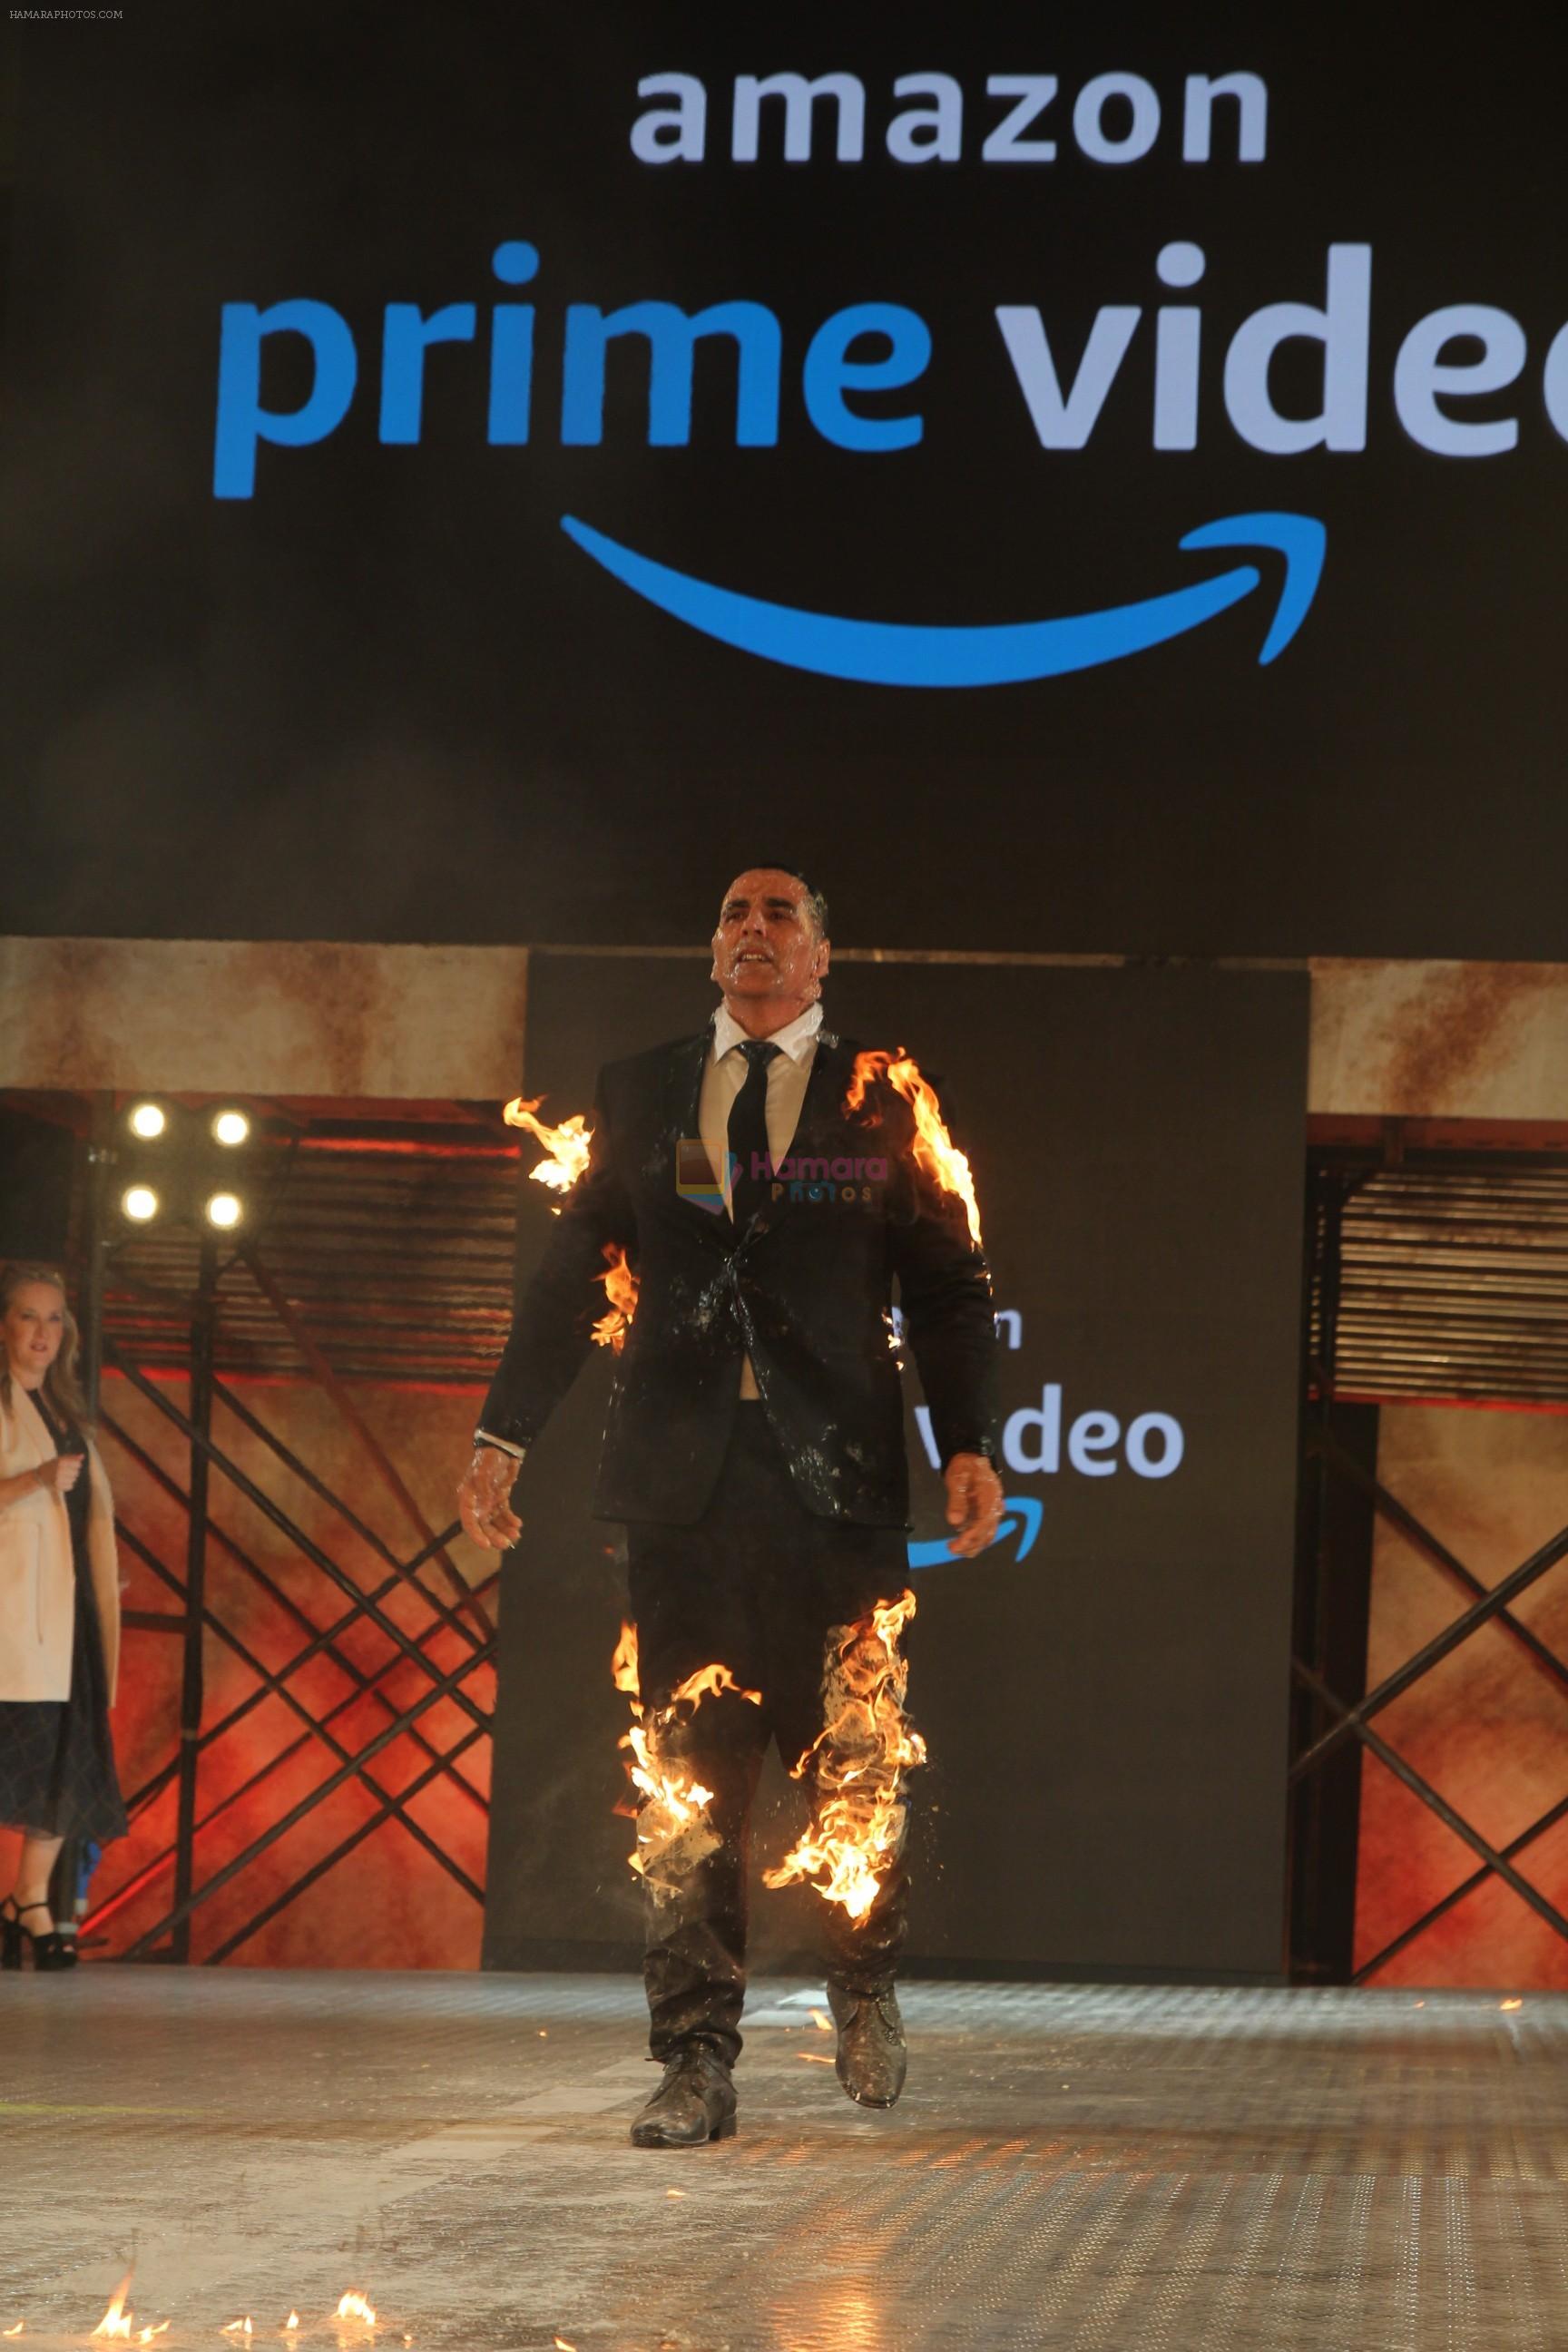 Akshay Kumar makes his digital debut with Amazon Prime Video at mahalxmi racecourse on 6th March 2019